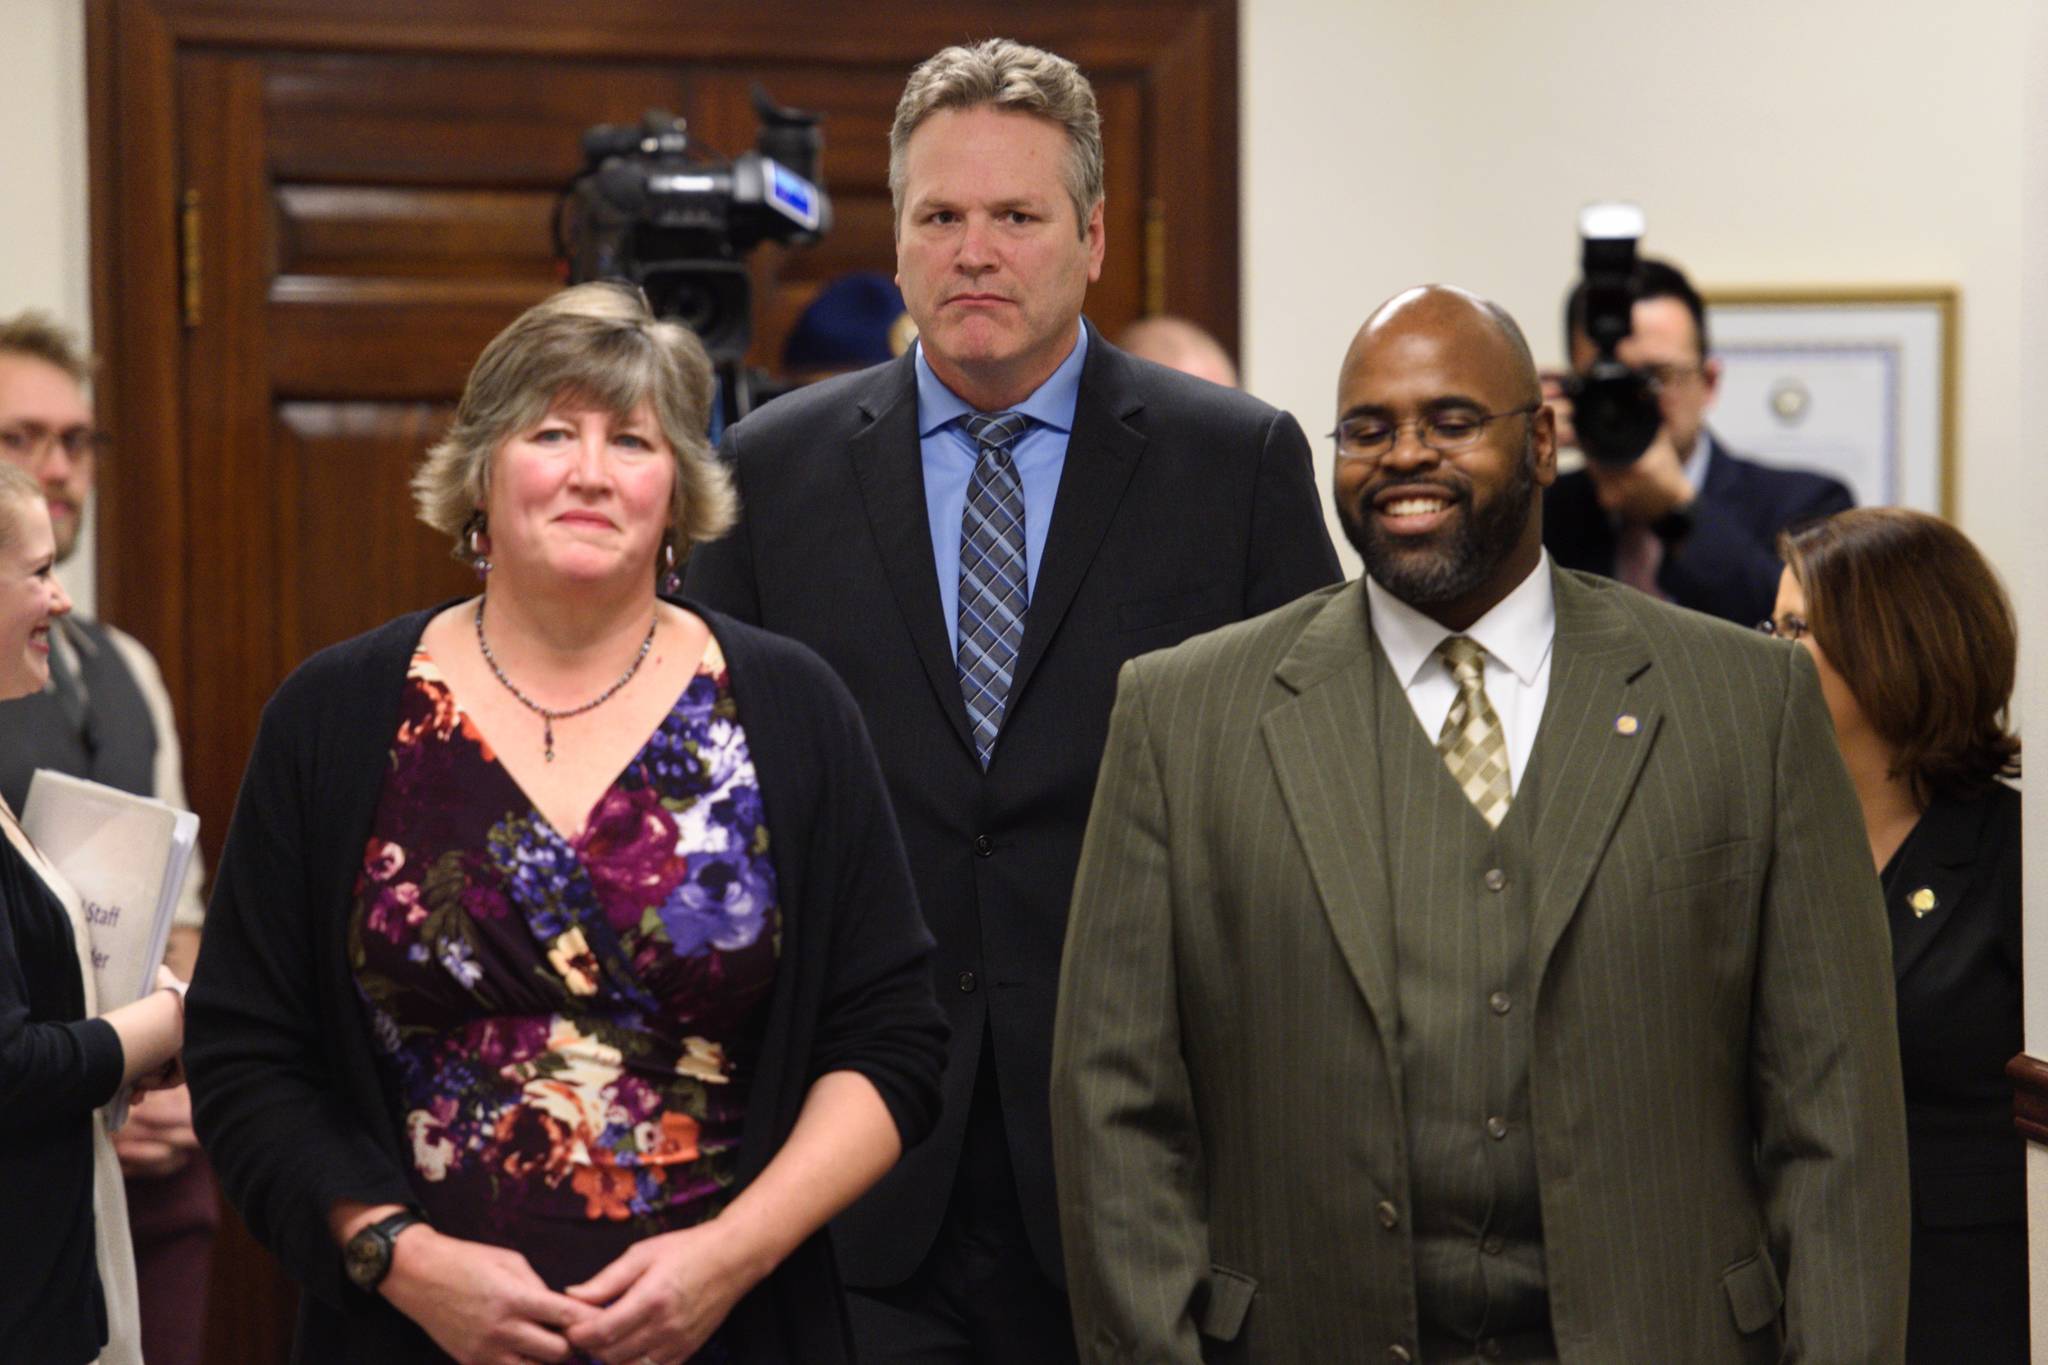 Gov. Mike Dunleavy gives his State of the State speech in the House chamber at the Capitol in Juneau, Alaska, as Senate President Cathy Giessel, R-Anchorage, left, and House Speaker Pro Tempore Neal Foster, D-Nome, listen during a Joint Session of the Alaska Legislature on Tuesday, Jan. 22, 2019. (Michael Penn | Juneau Empire)